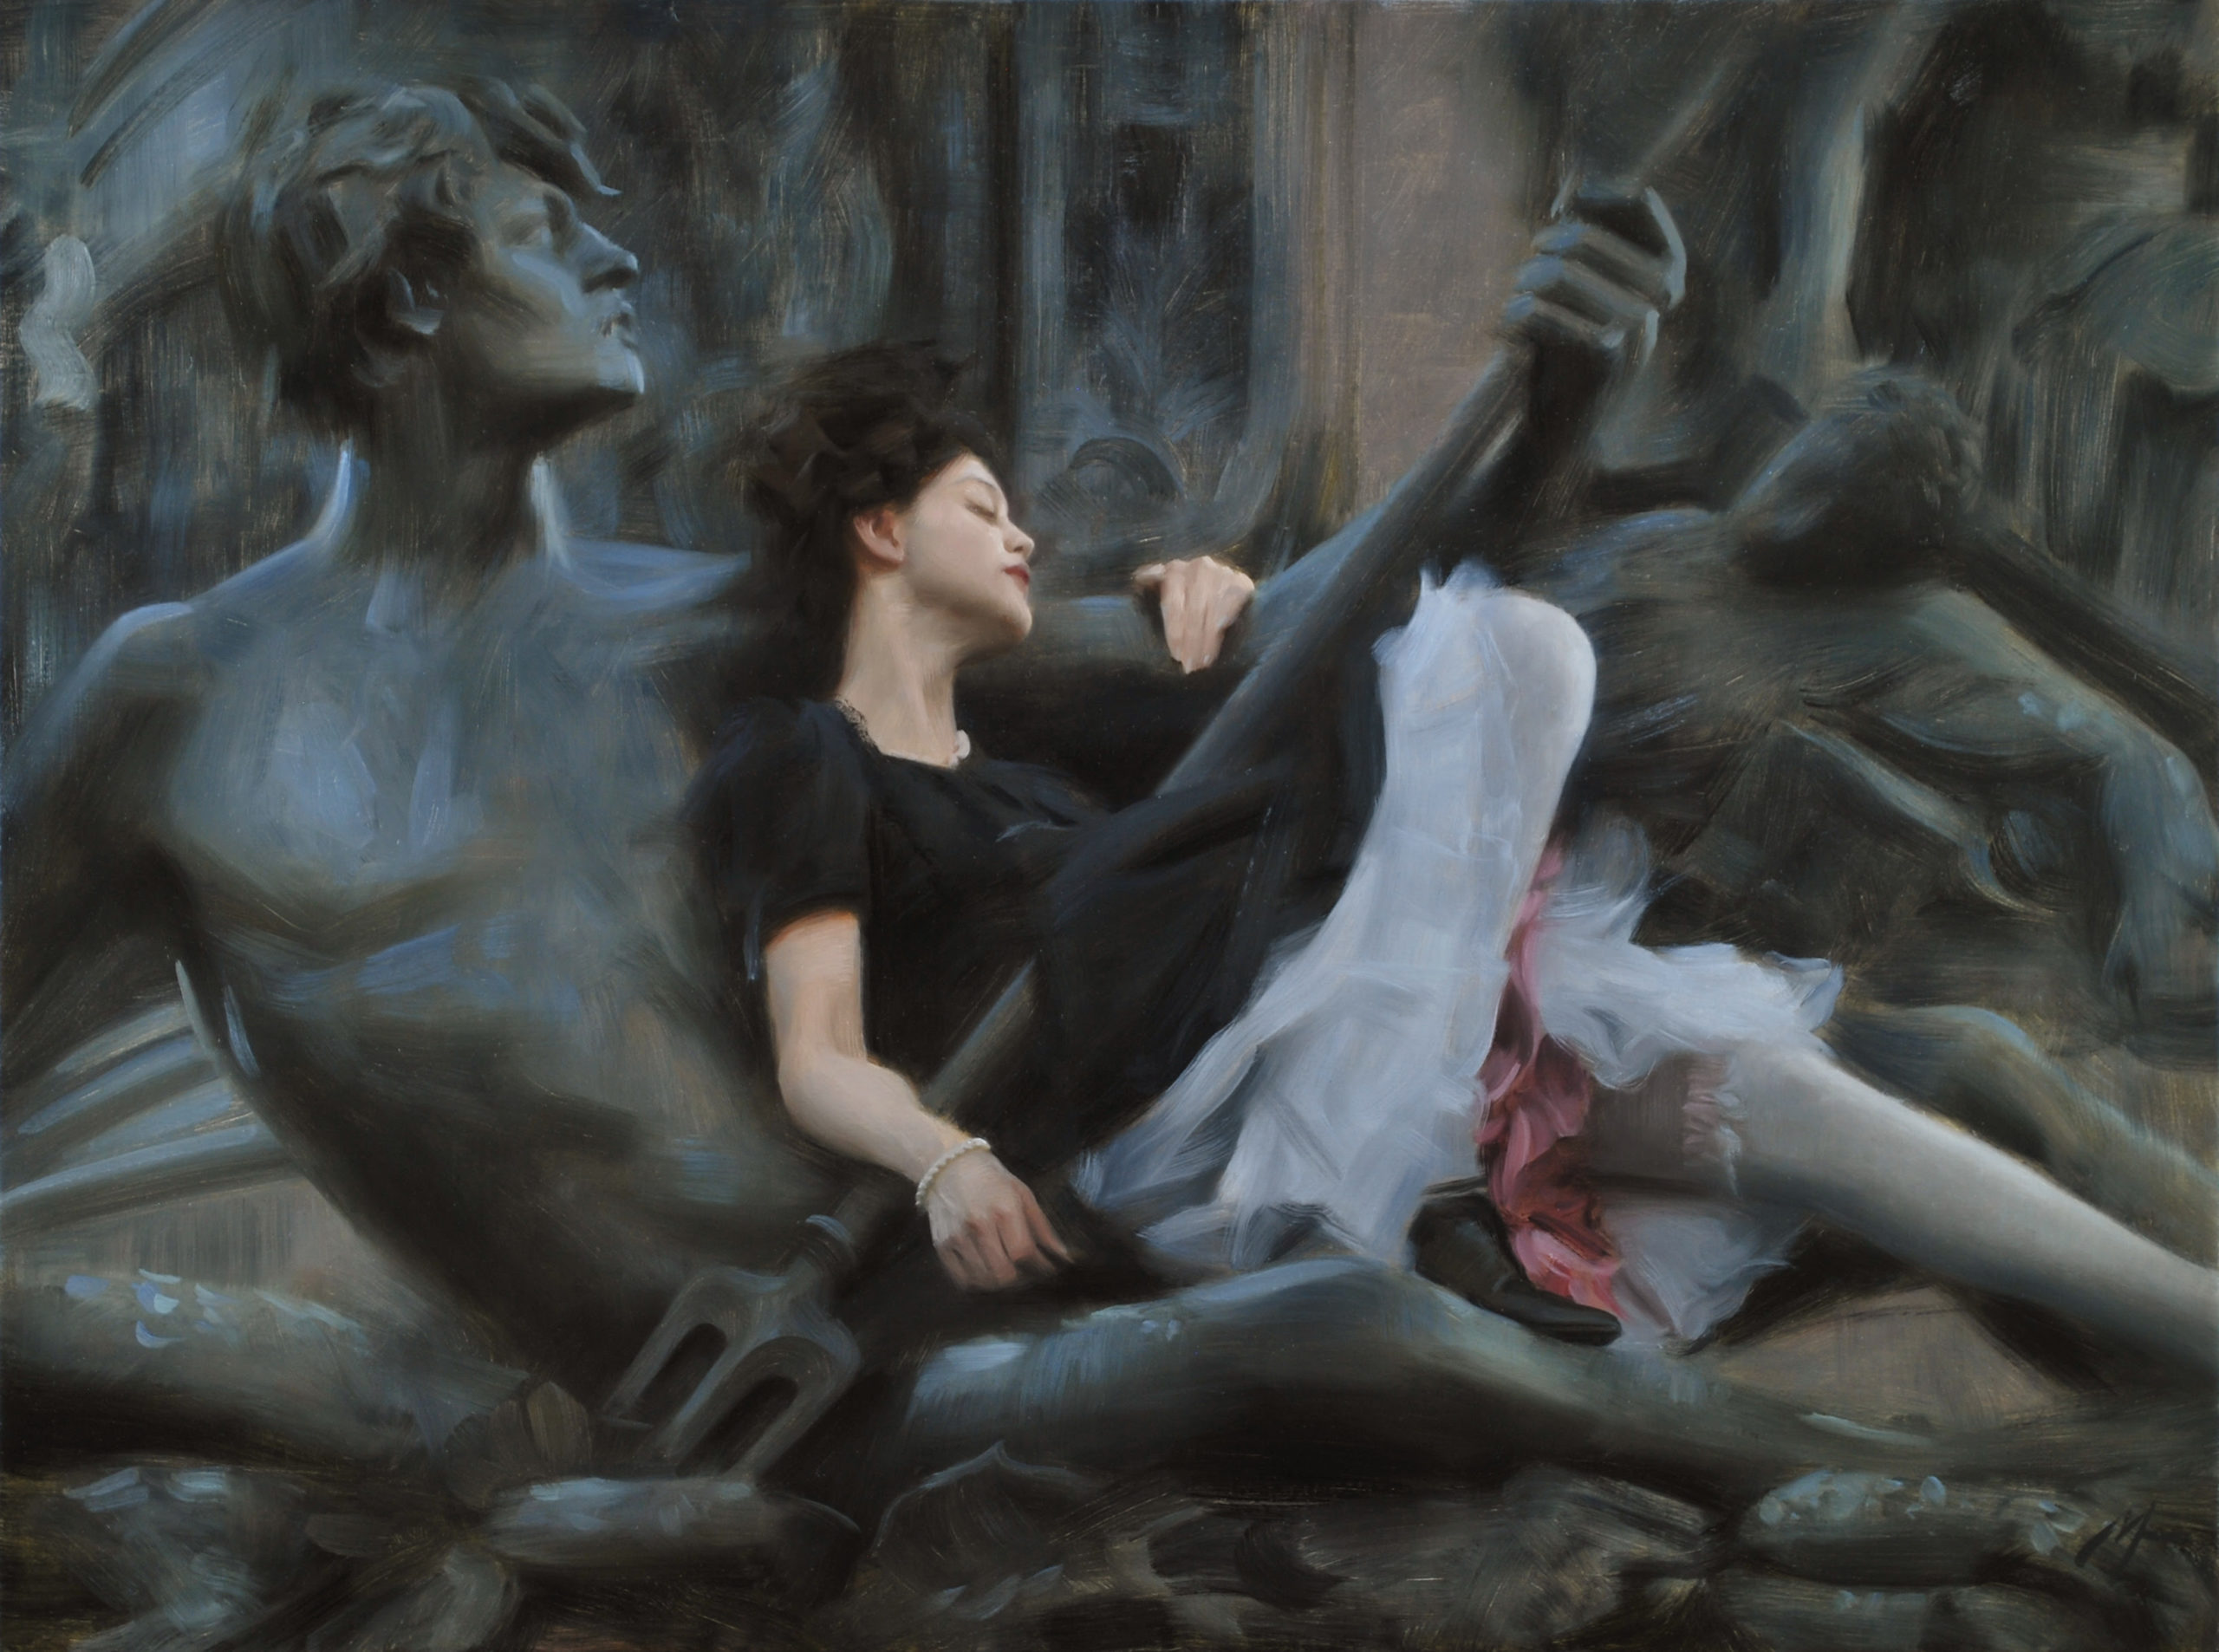 Nick Alm, "Two Lovers," 100 x 75 cm, Oil on linen